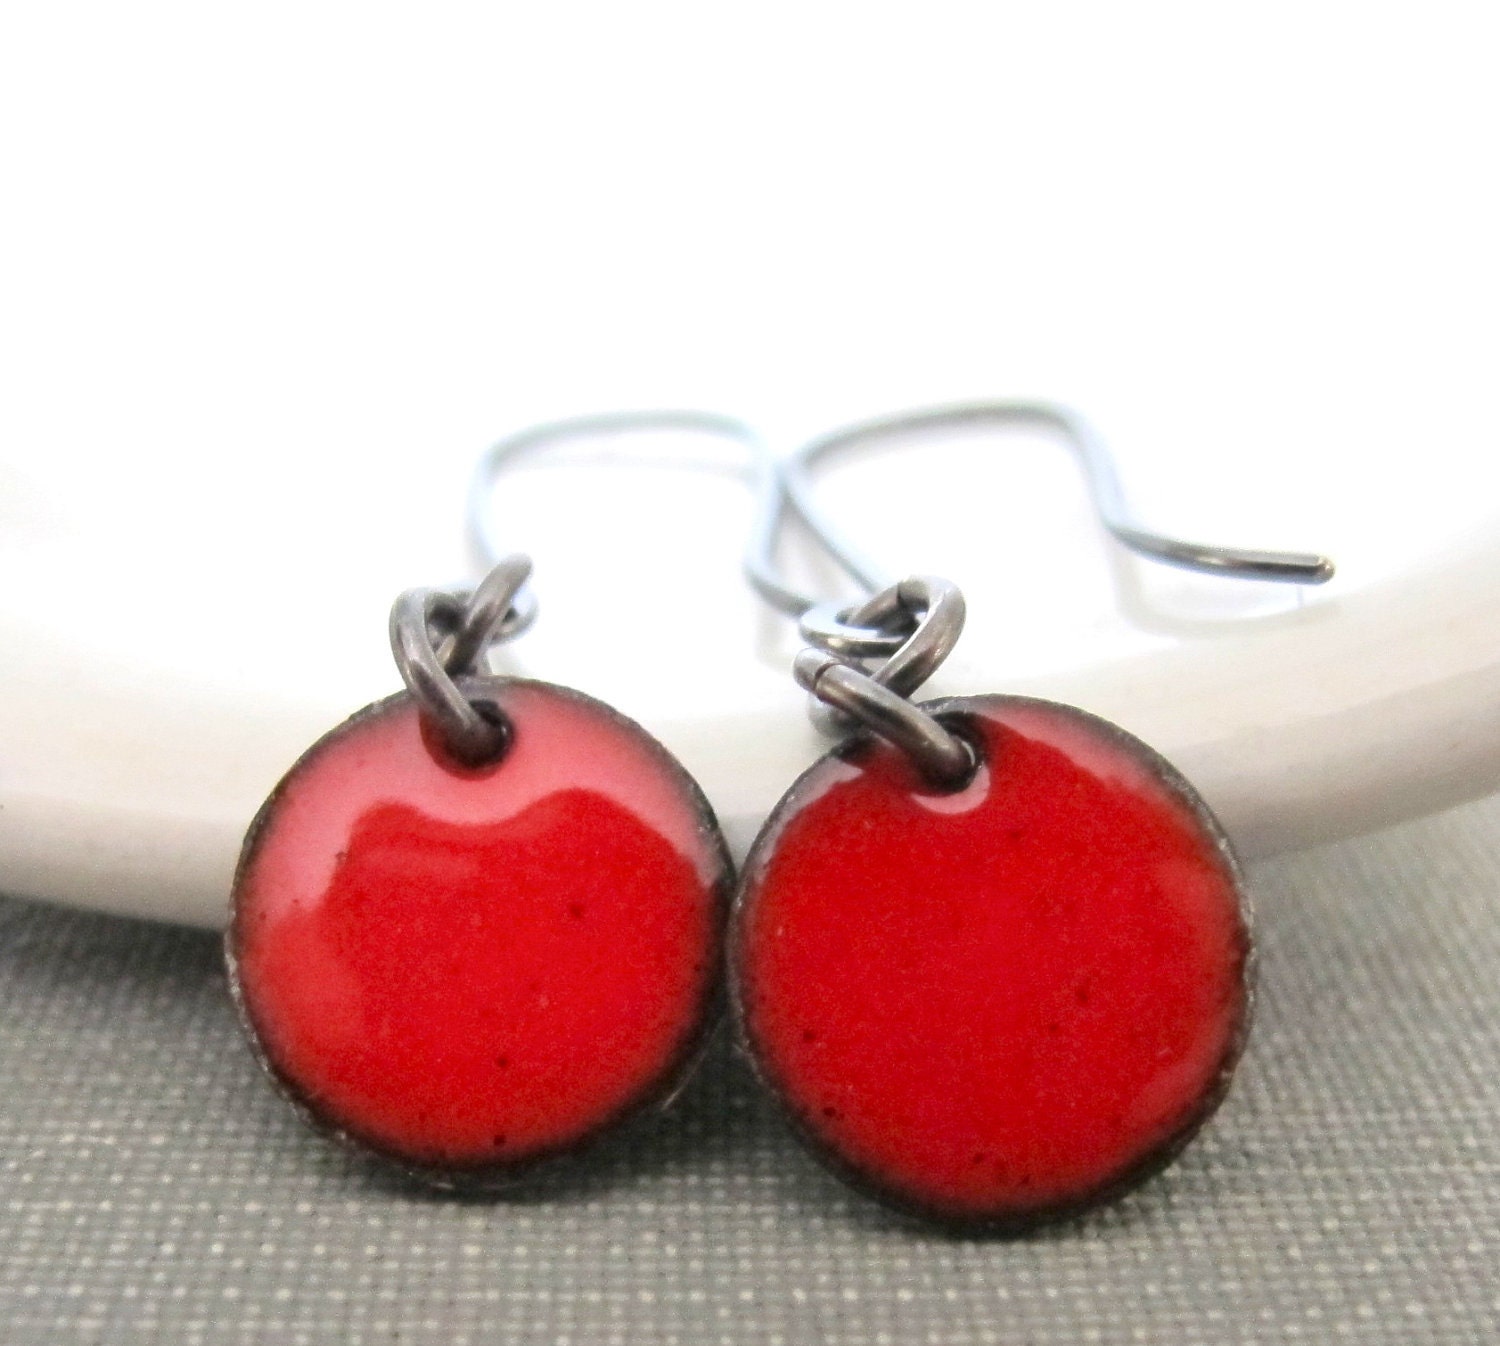 Red Earrings, Enameled Earrings, Enameled Copper, Round Red Circles, Red Dots, Silver Earrings, Geometric Jewelry, Silver Jewelry - fiveforty